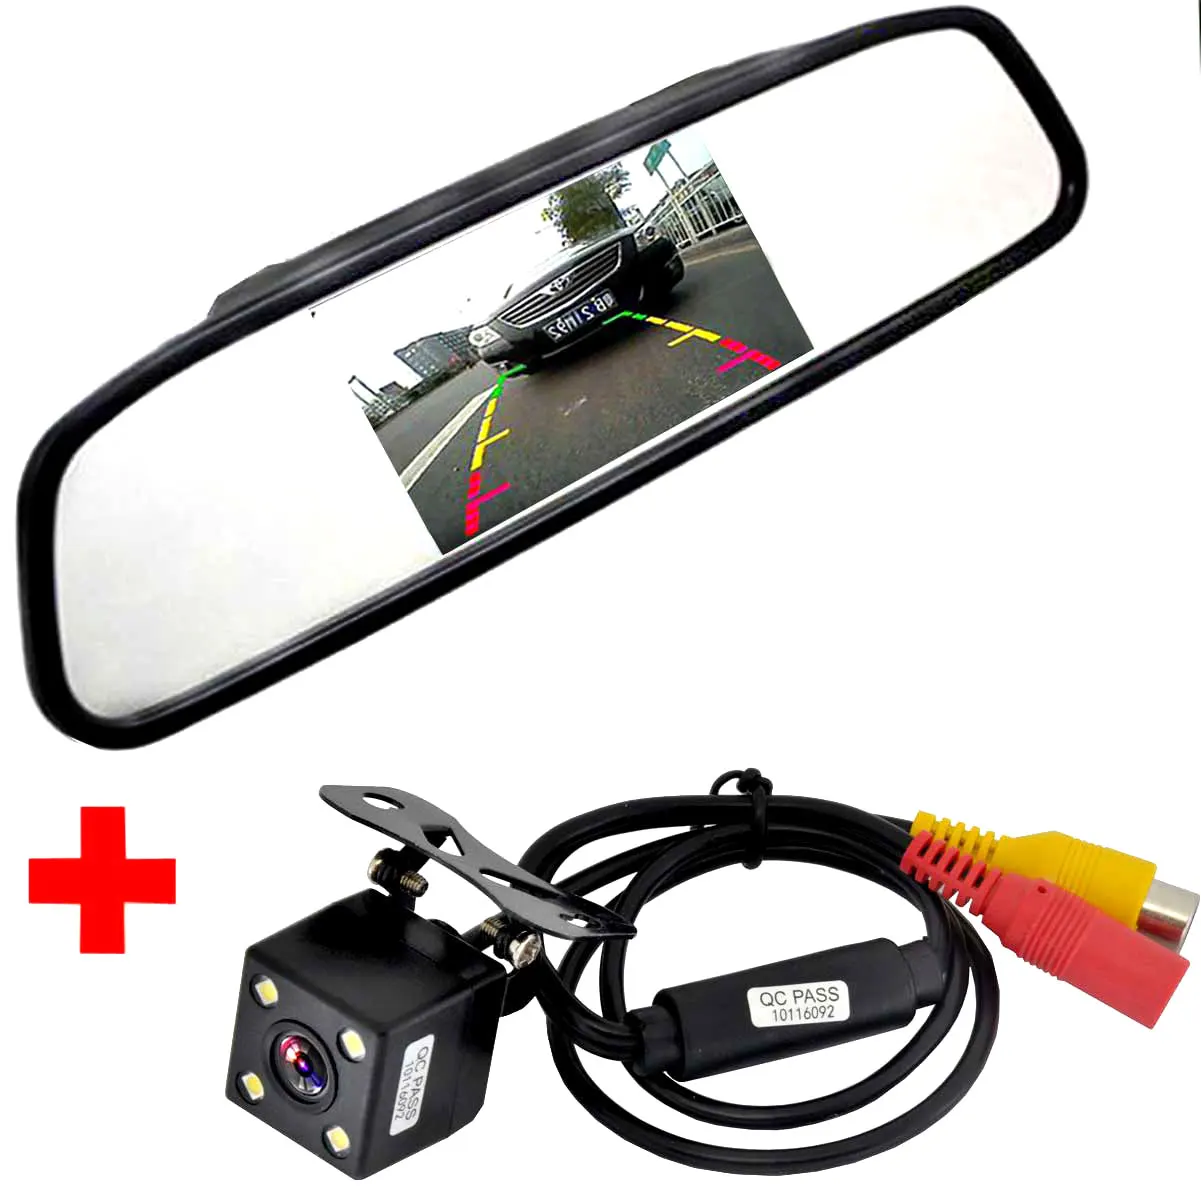 

Car CCD Parking Monitor 4 LED NIGHT Reversing CCD Car Rear View Camera With 4.3 inch Car Rearview Mirror Monitor